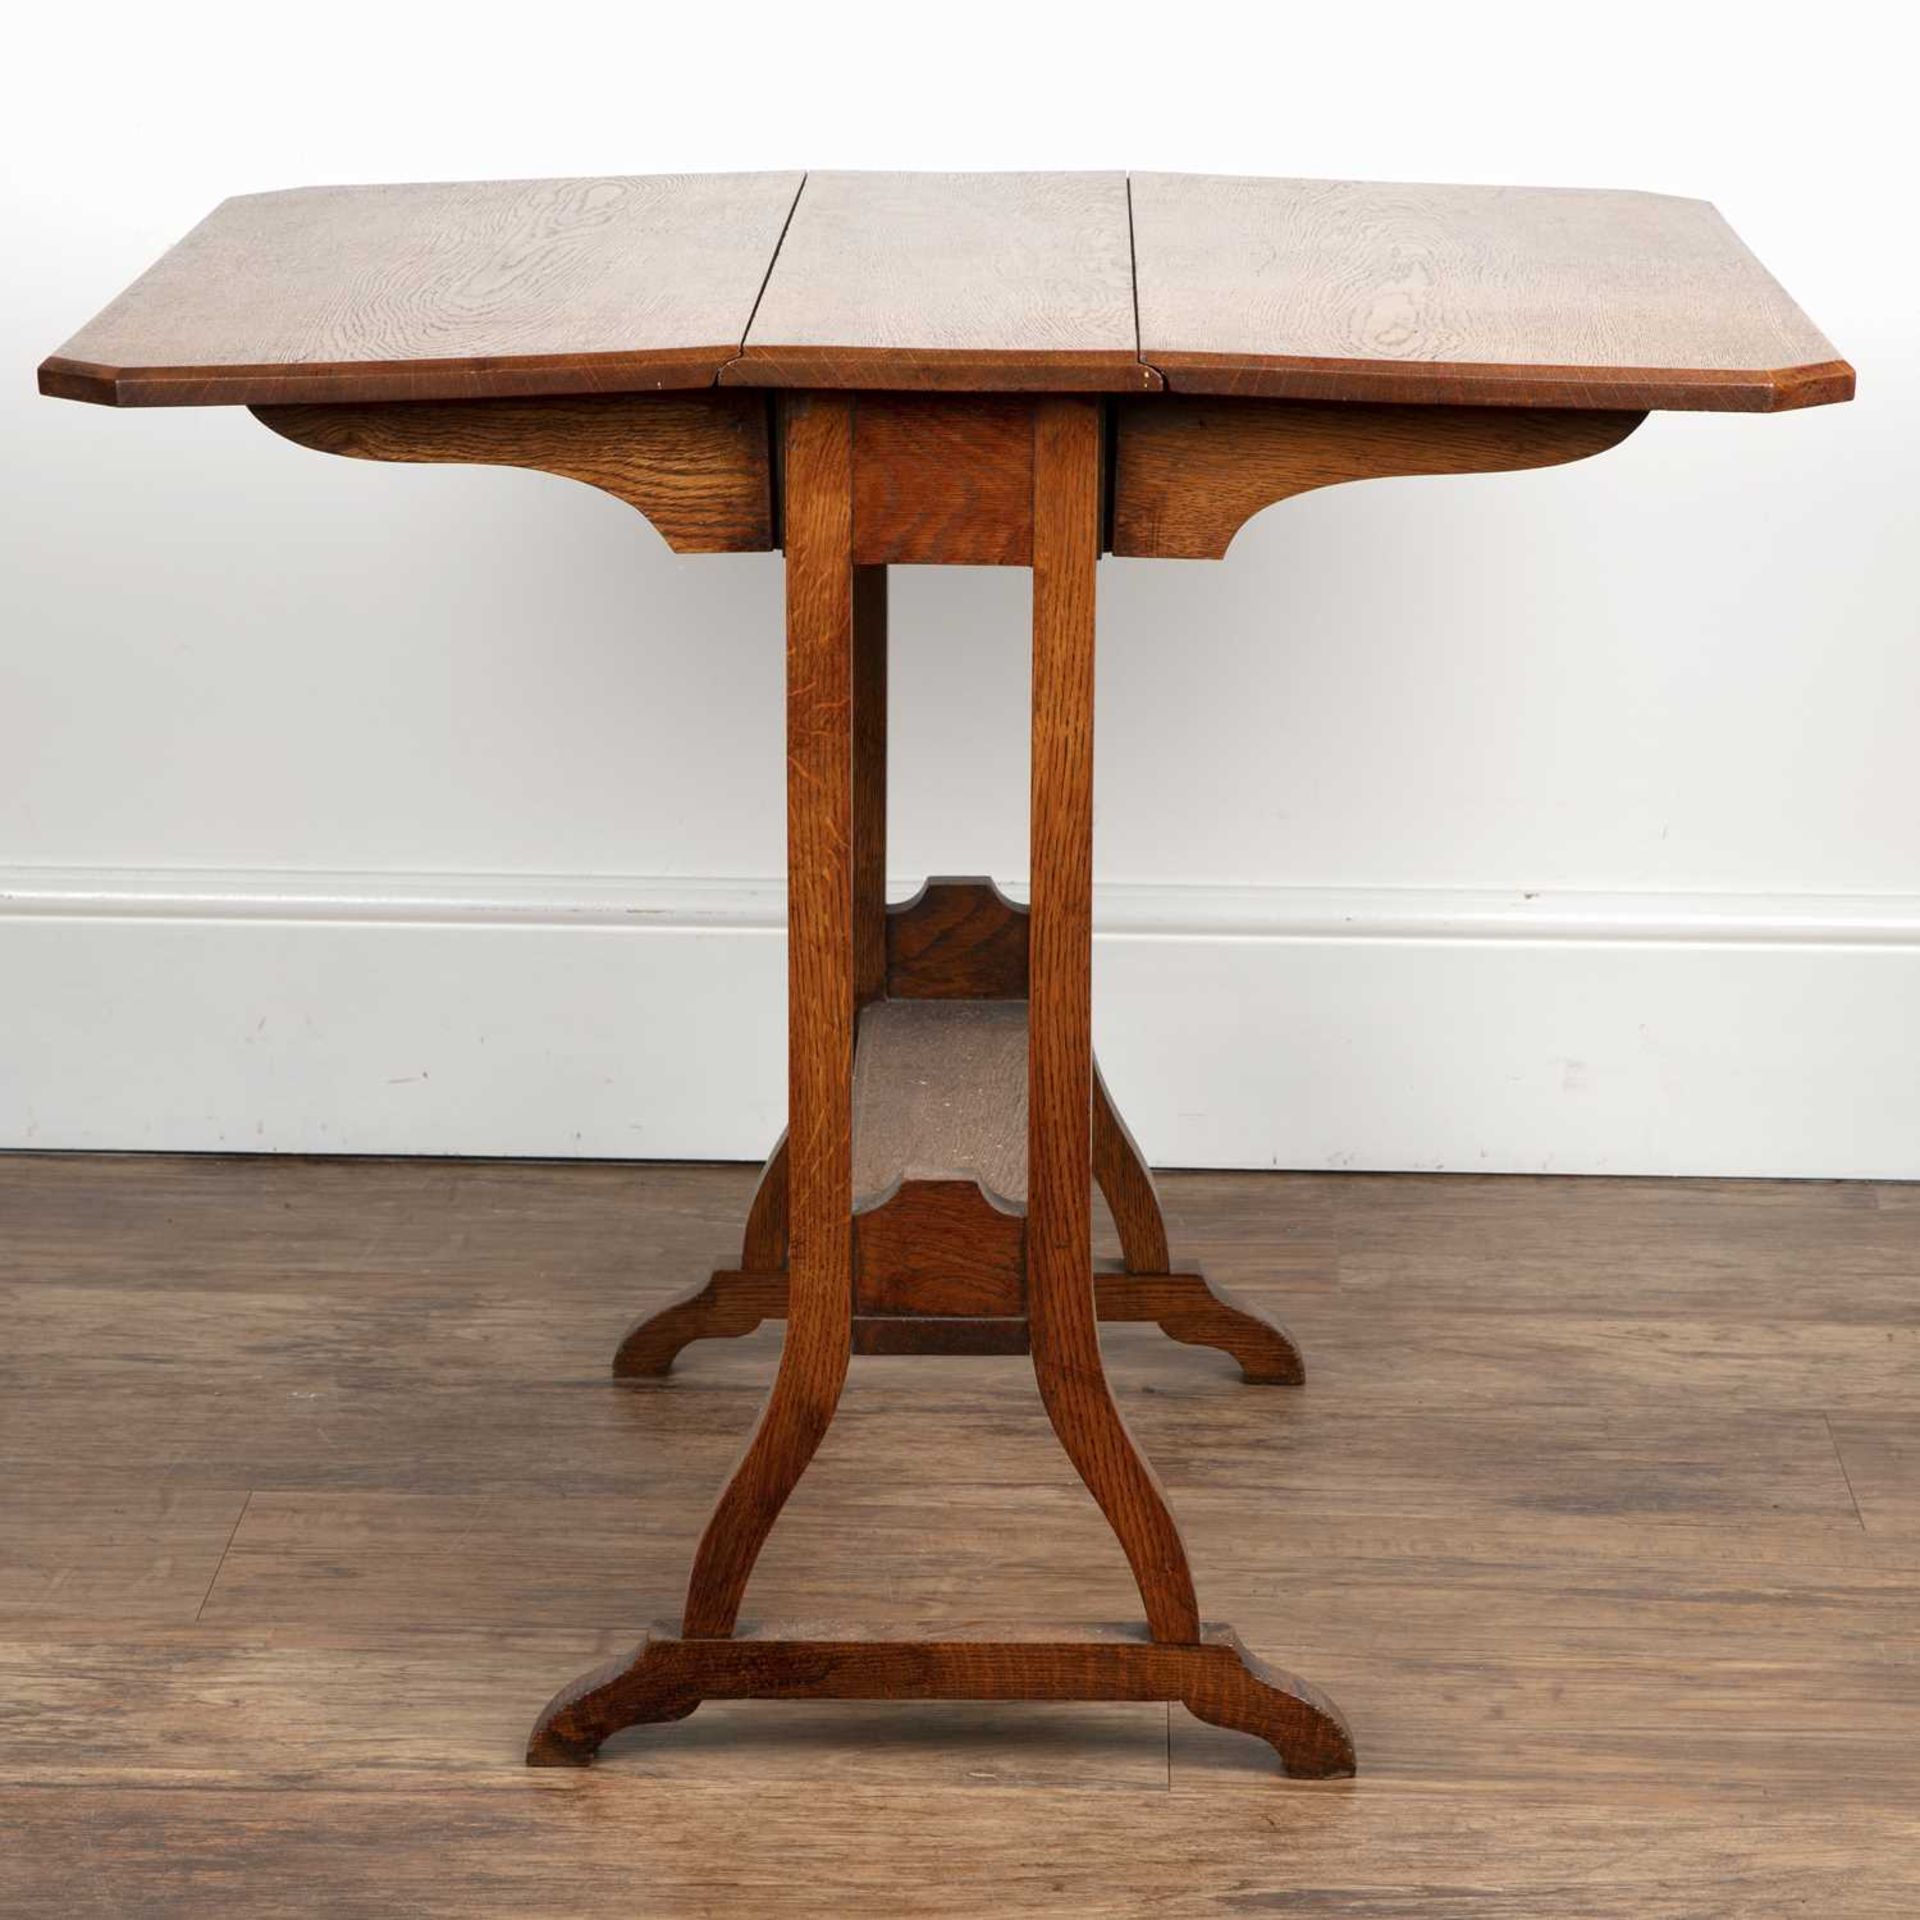 Oak small Sutherland table the top with canted corners, on shaped legs, unmarked, 20cm wide overall, - Image 4 of 6